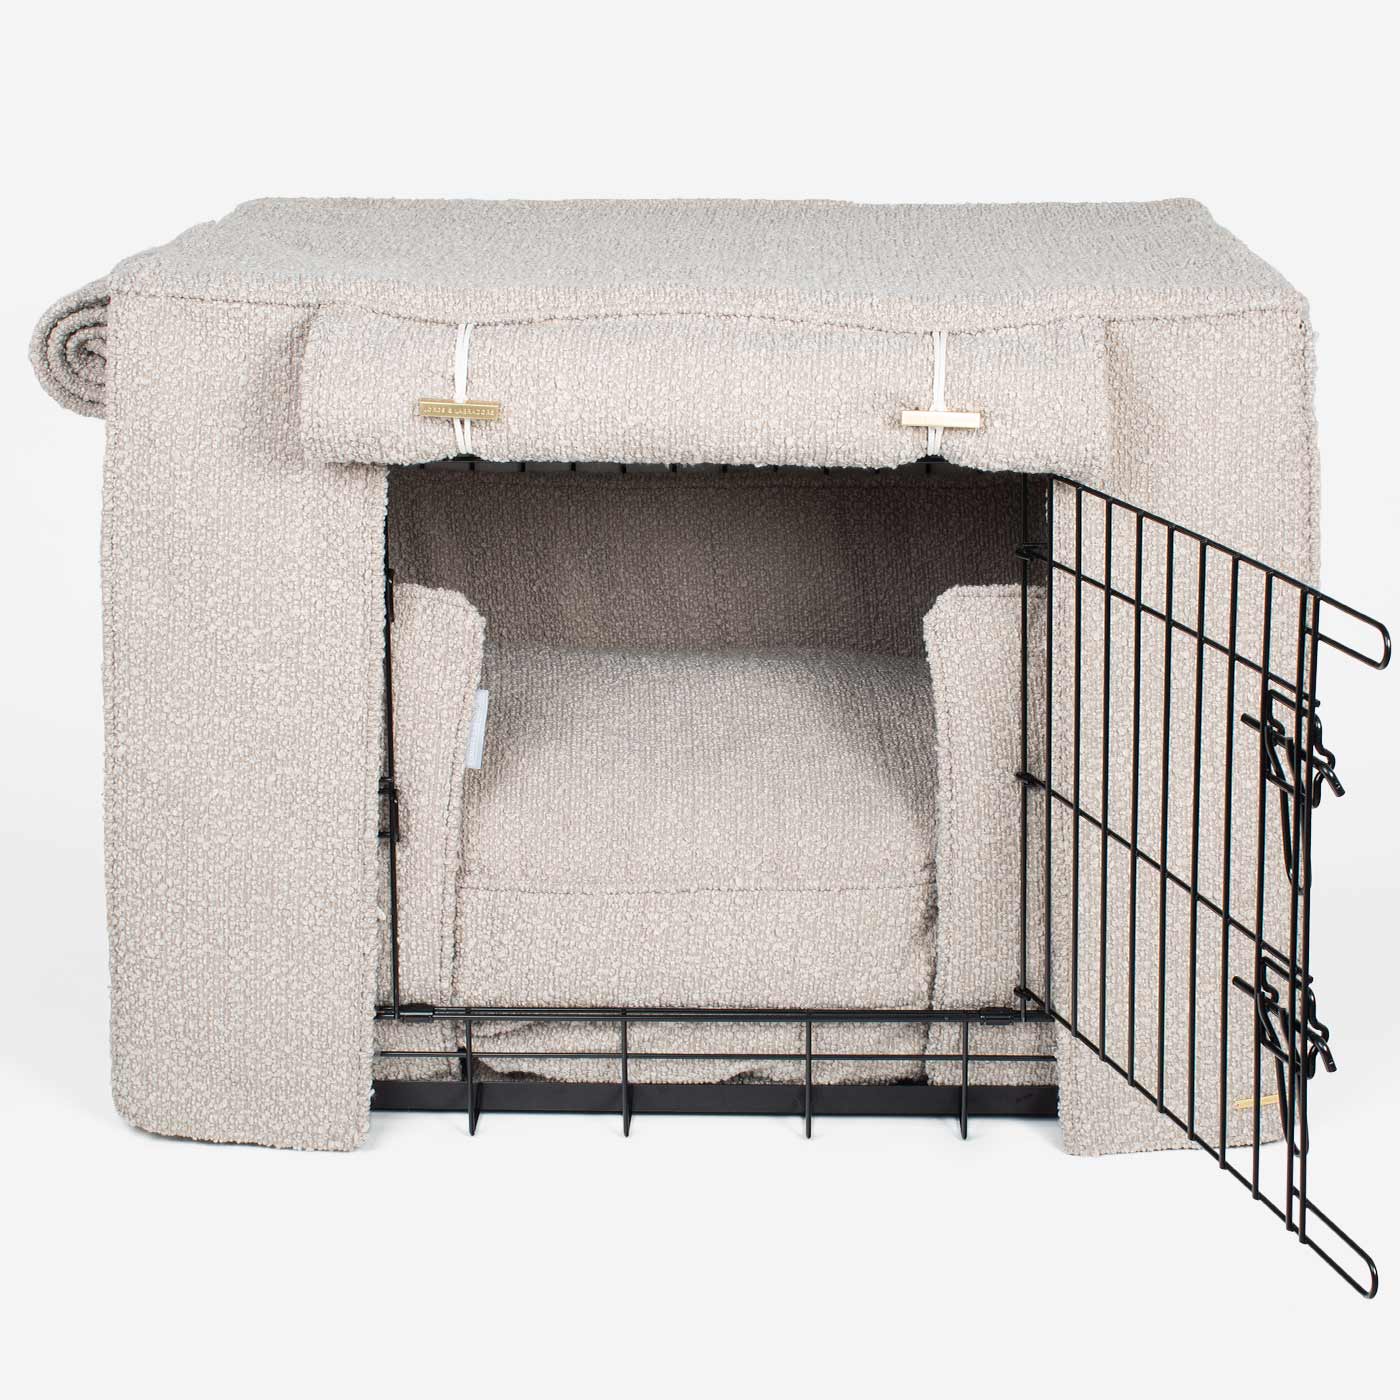 Luxury Heavy Duty Dog Crate, In Stunning Mink Bouclé Crate Set, The Perfect Dog Crate Set For Building The Ultimate Pet Den! Dog Crate Cover Available To Personalise at Lords & Labradors